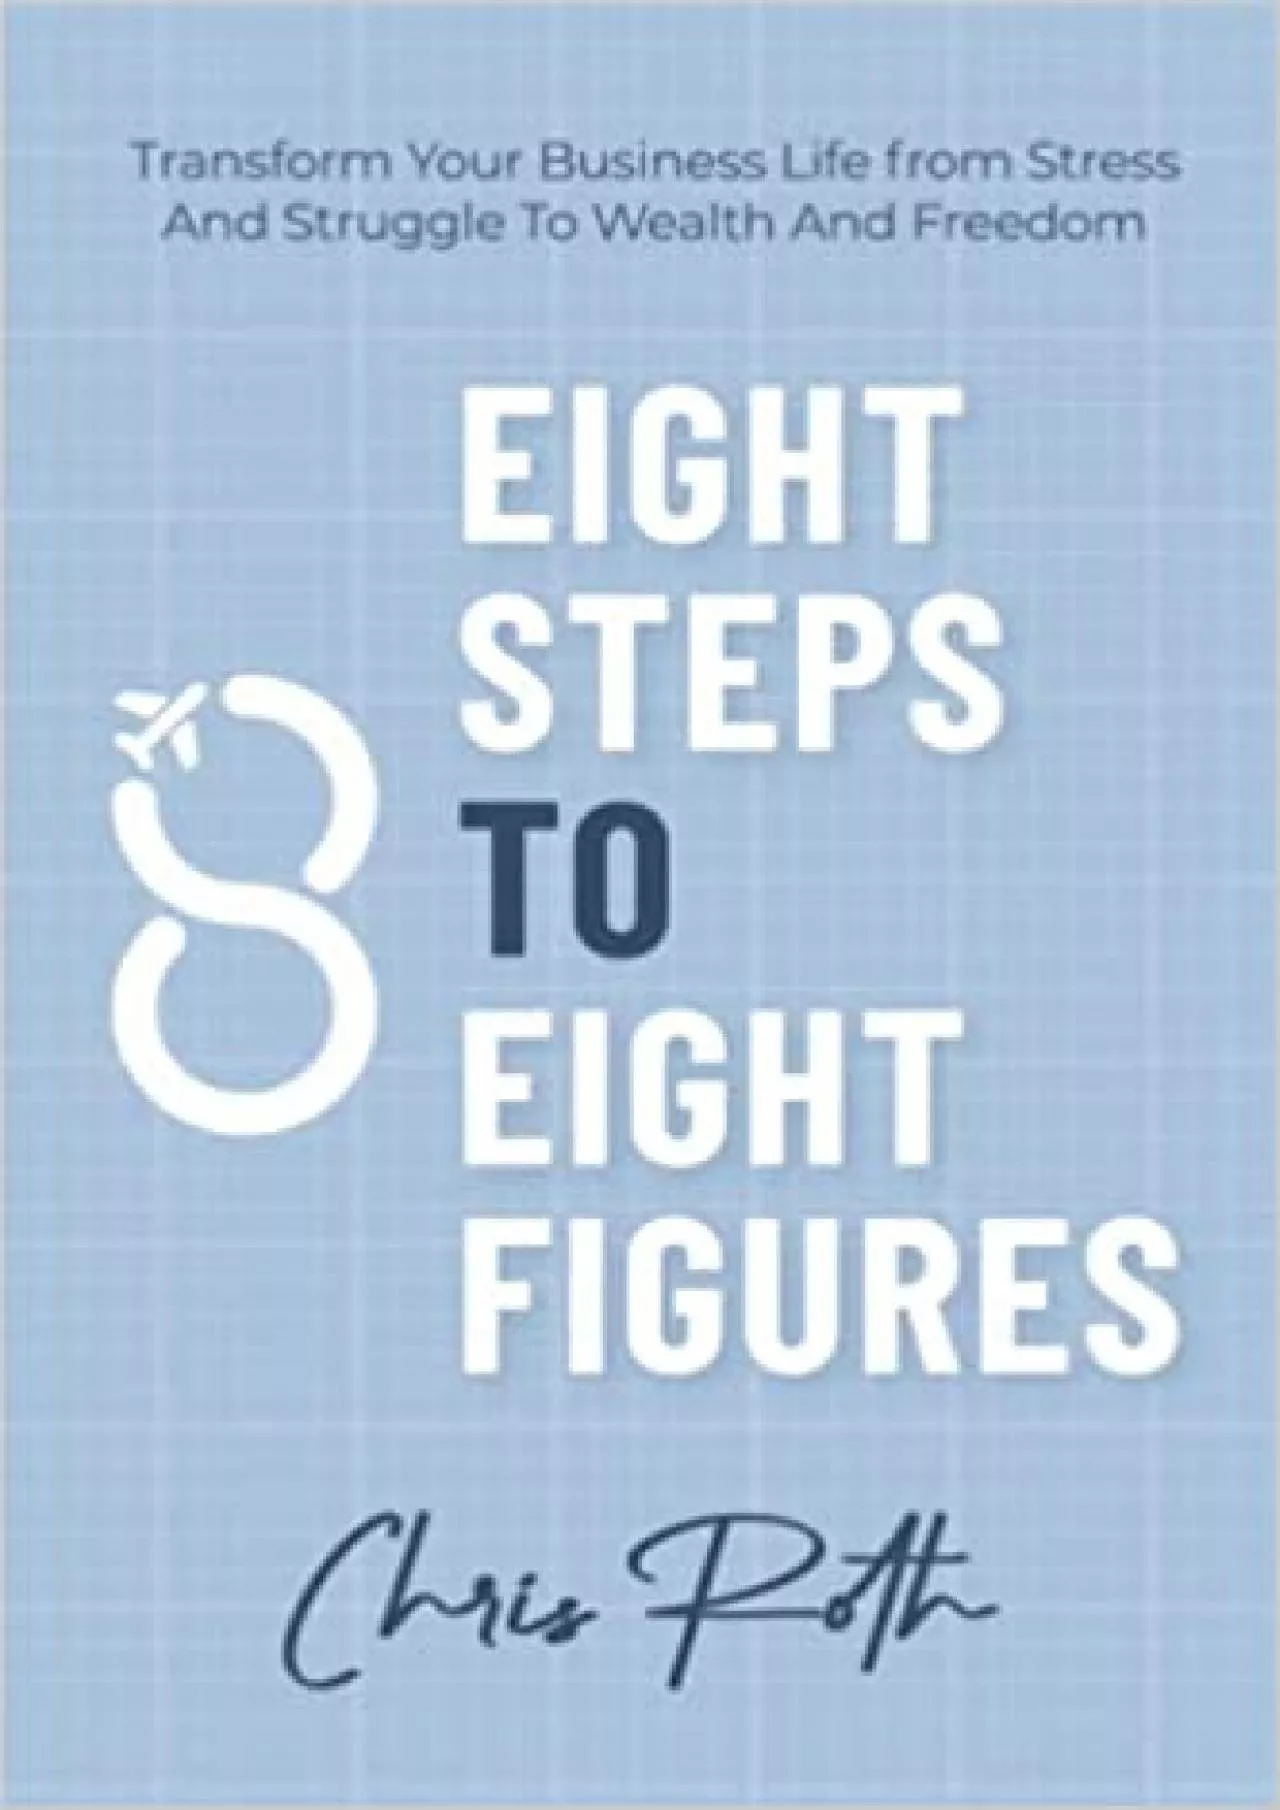 8 Steps to 8 Figures: Transform Your Business Life from Stress And Struggle To Wealth